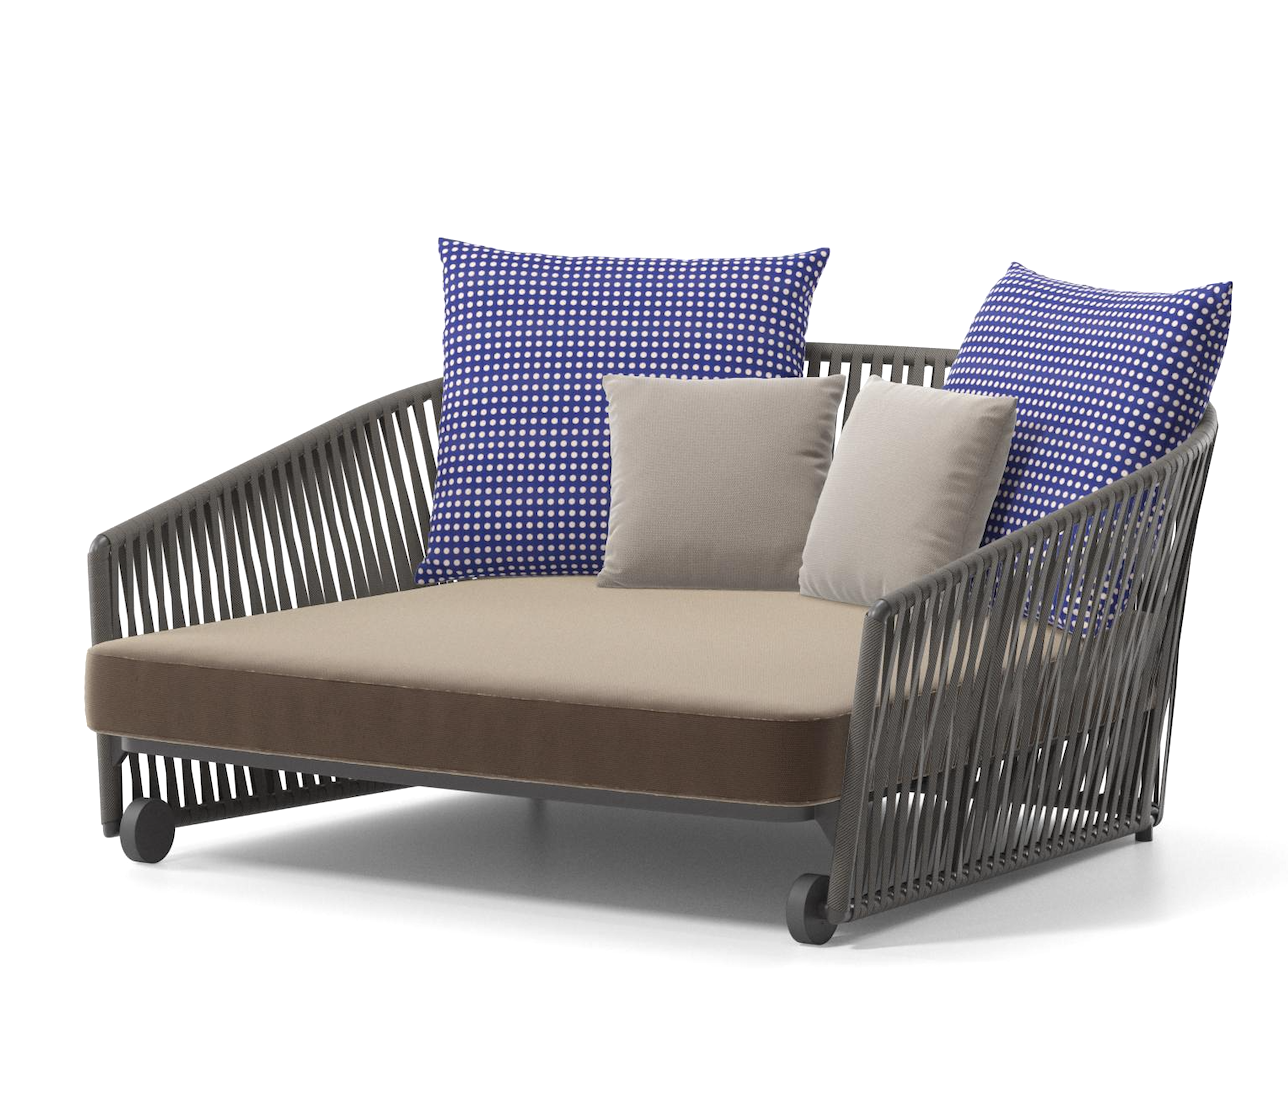 Product Image bitta lounge daybed